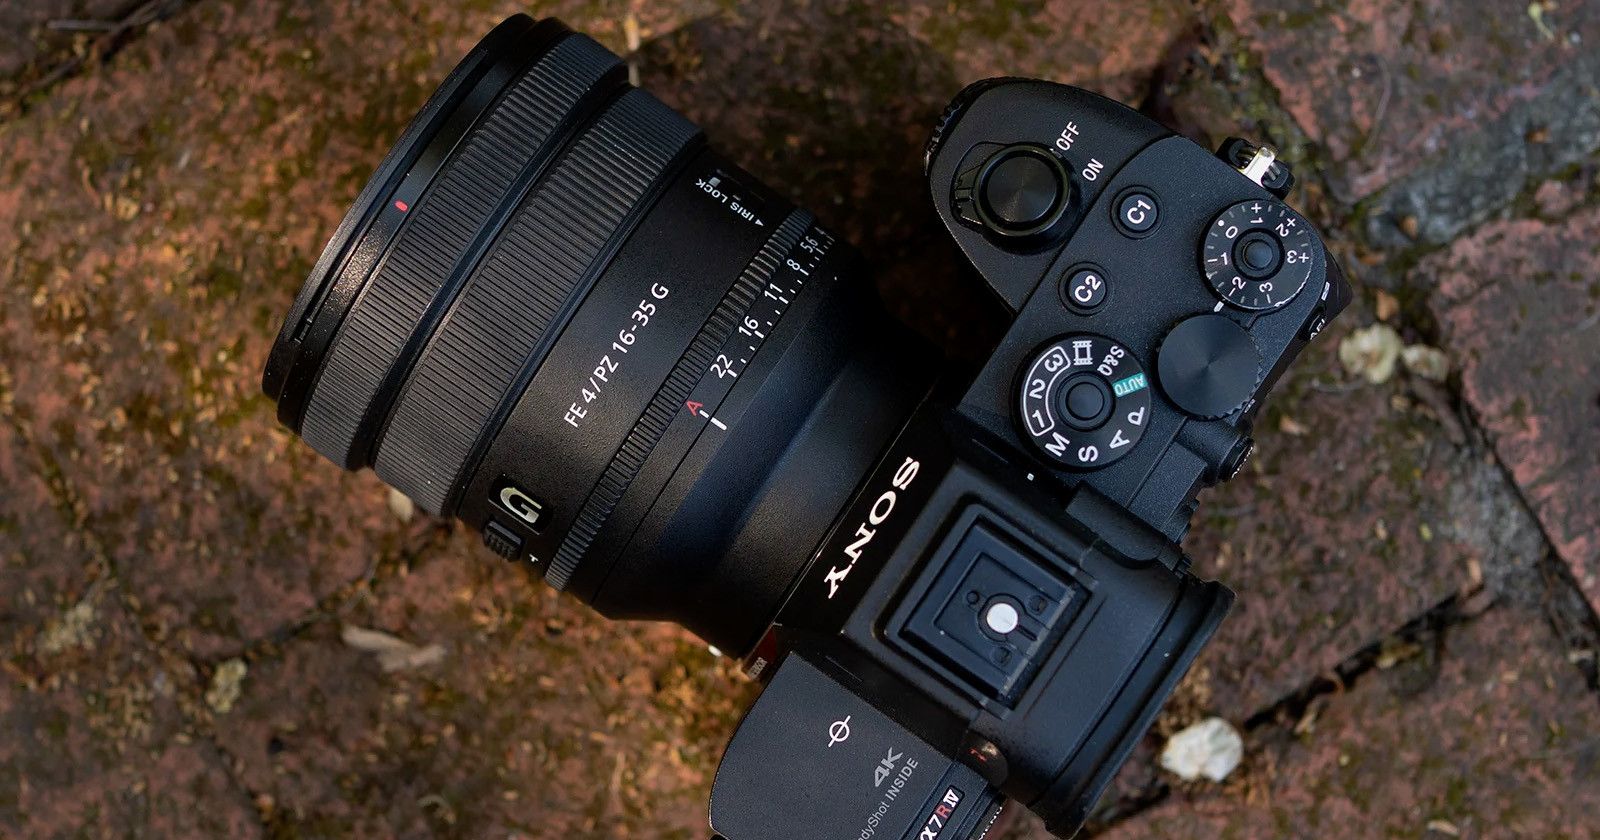  sony delays 16-35mm power zoom lens until 